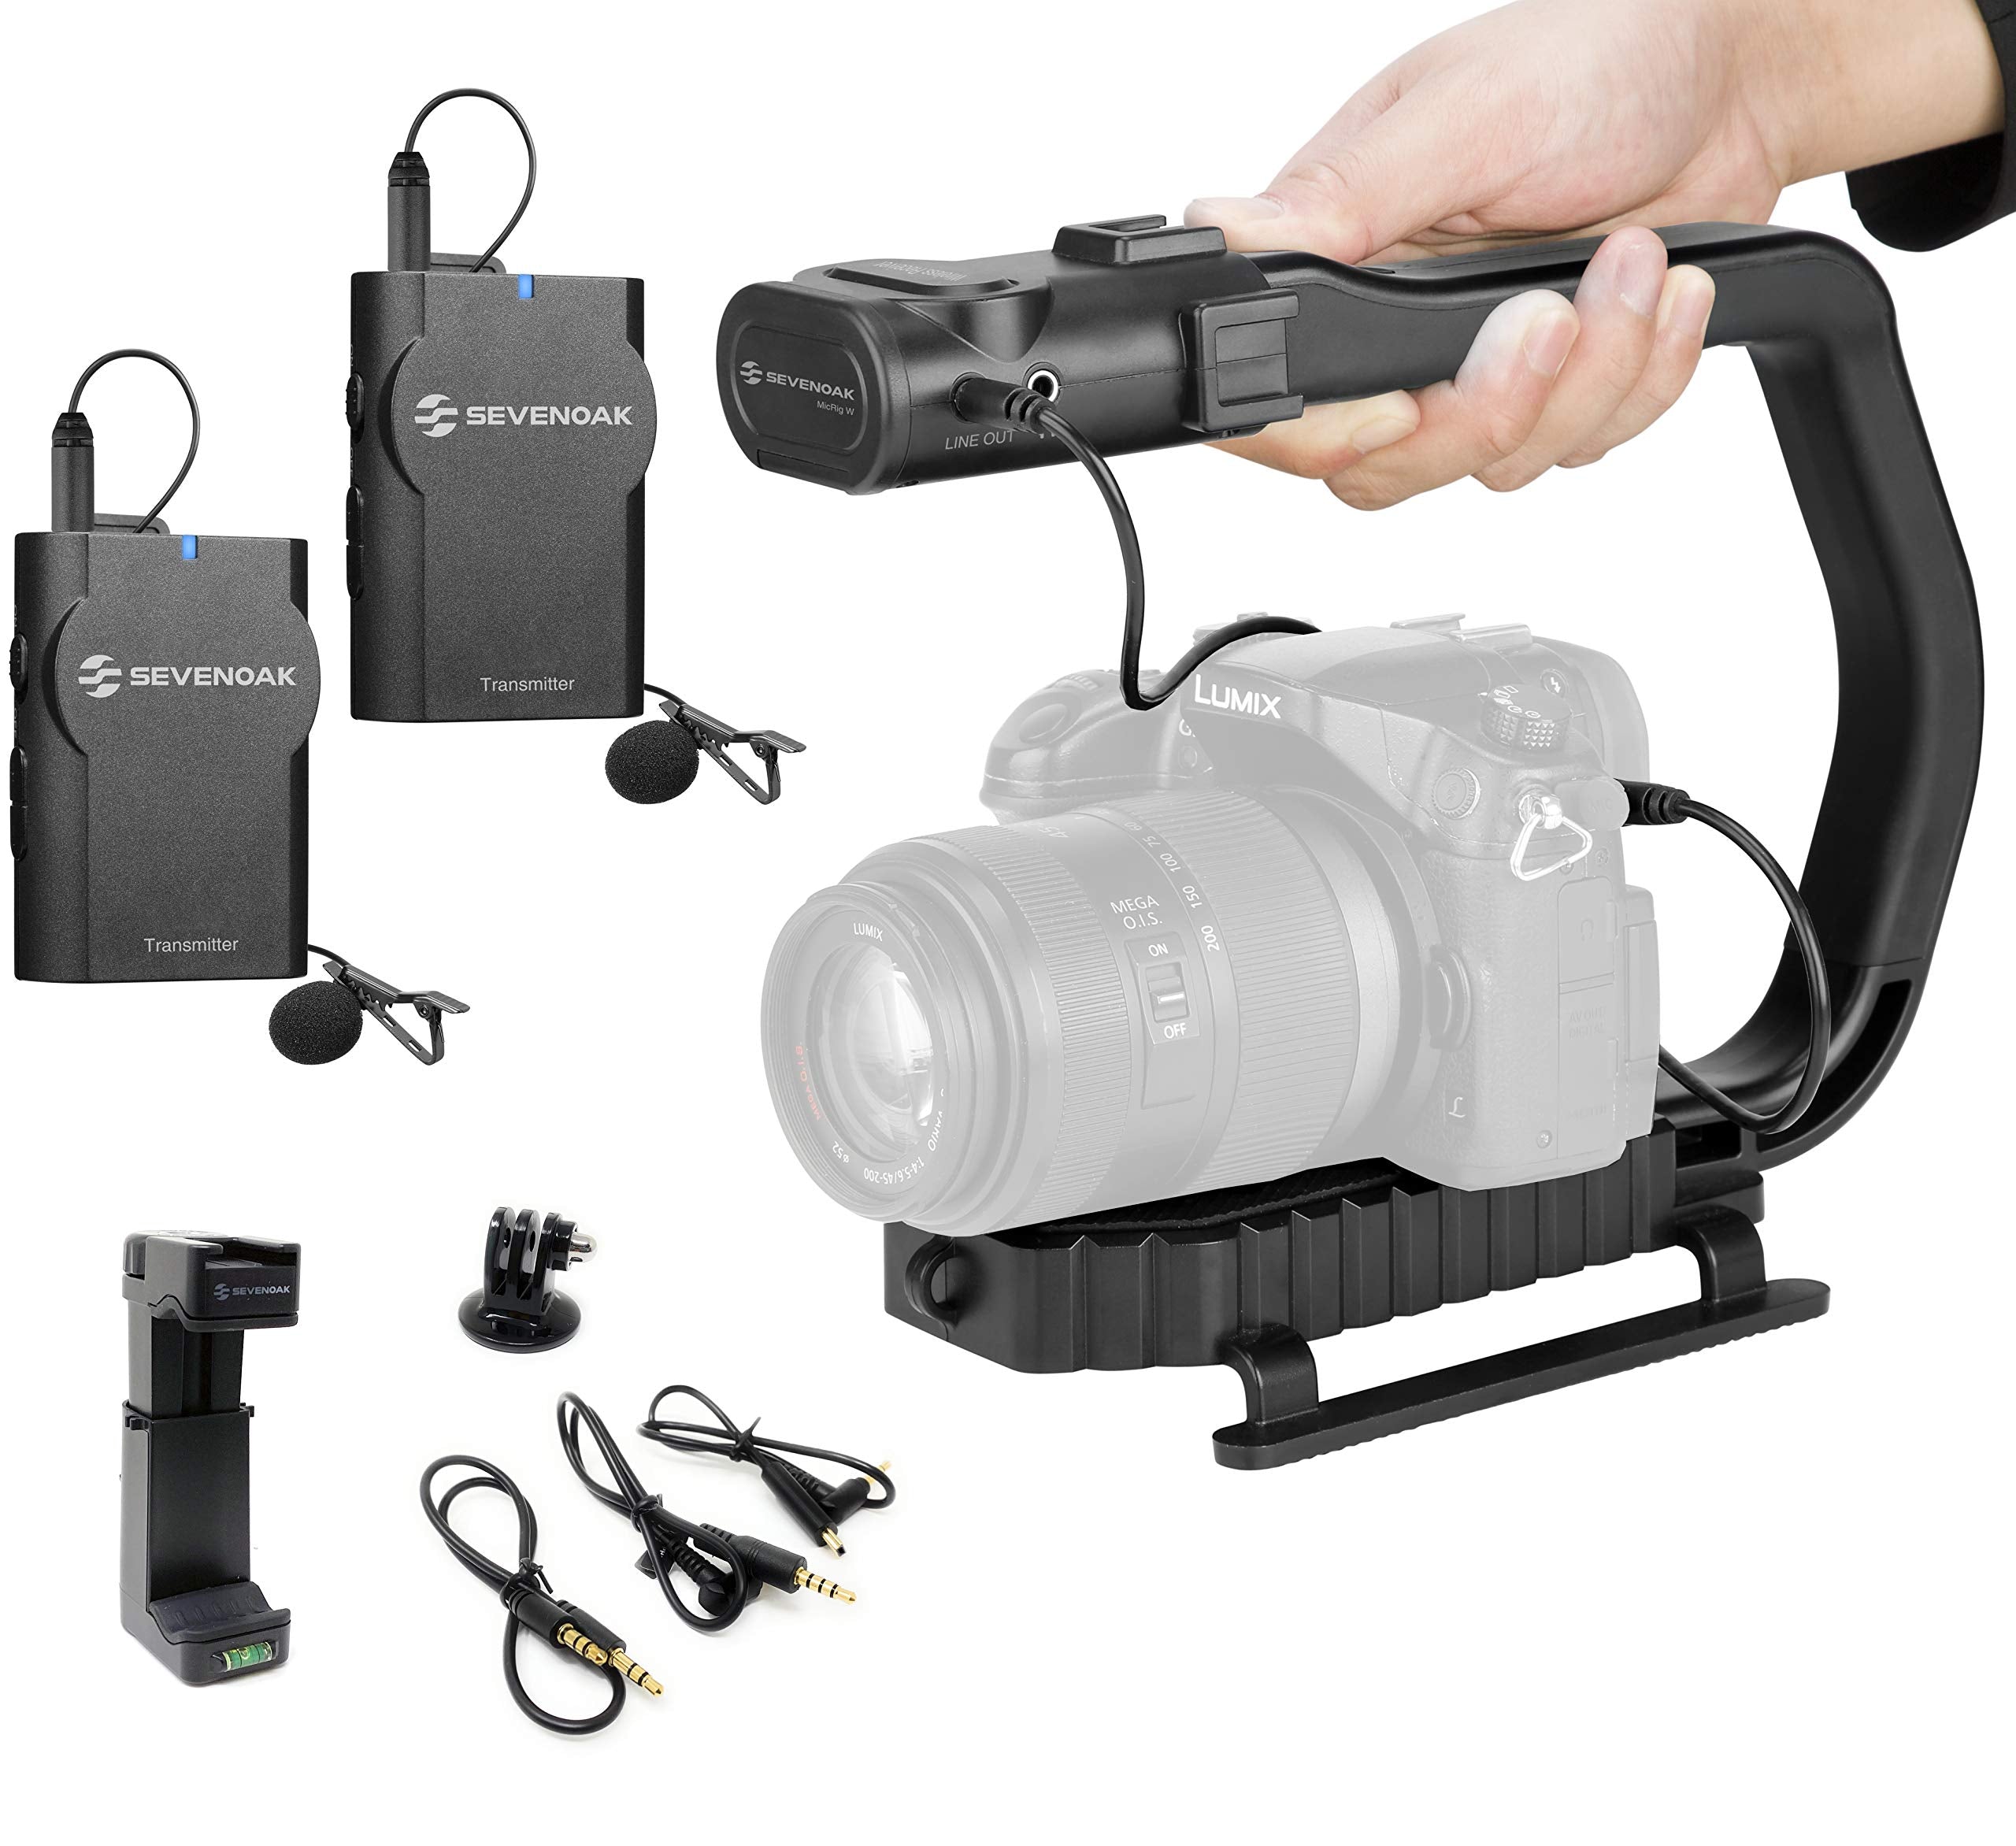 Movo MicRig-W2 Wireless Microphone Filmmaker Kit - Video Handle Stabilizer with Built-in Dual Wireless Lavalier Microphone Compatible with Canon EOS, Nikon, Sony, Panasonic DSLR and Mirrorless Cameras  - Good